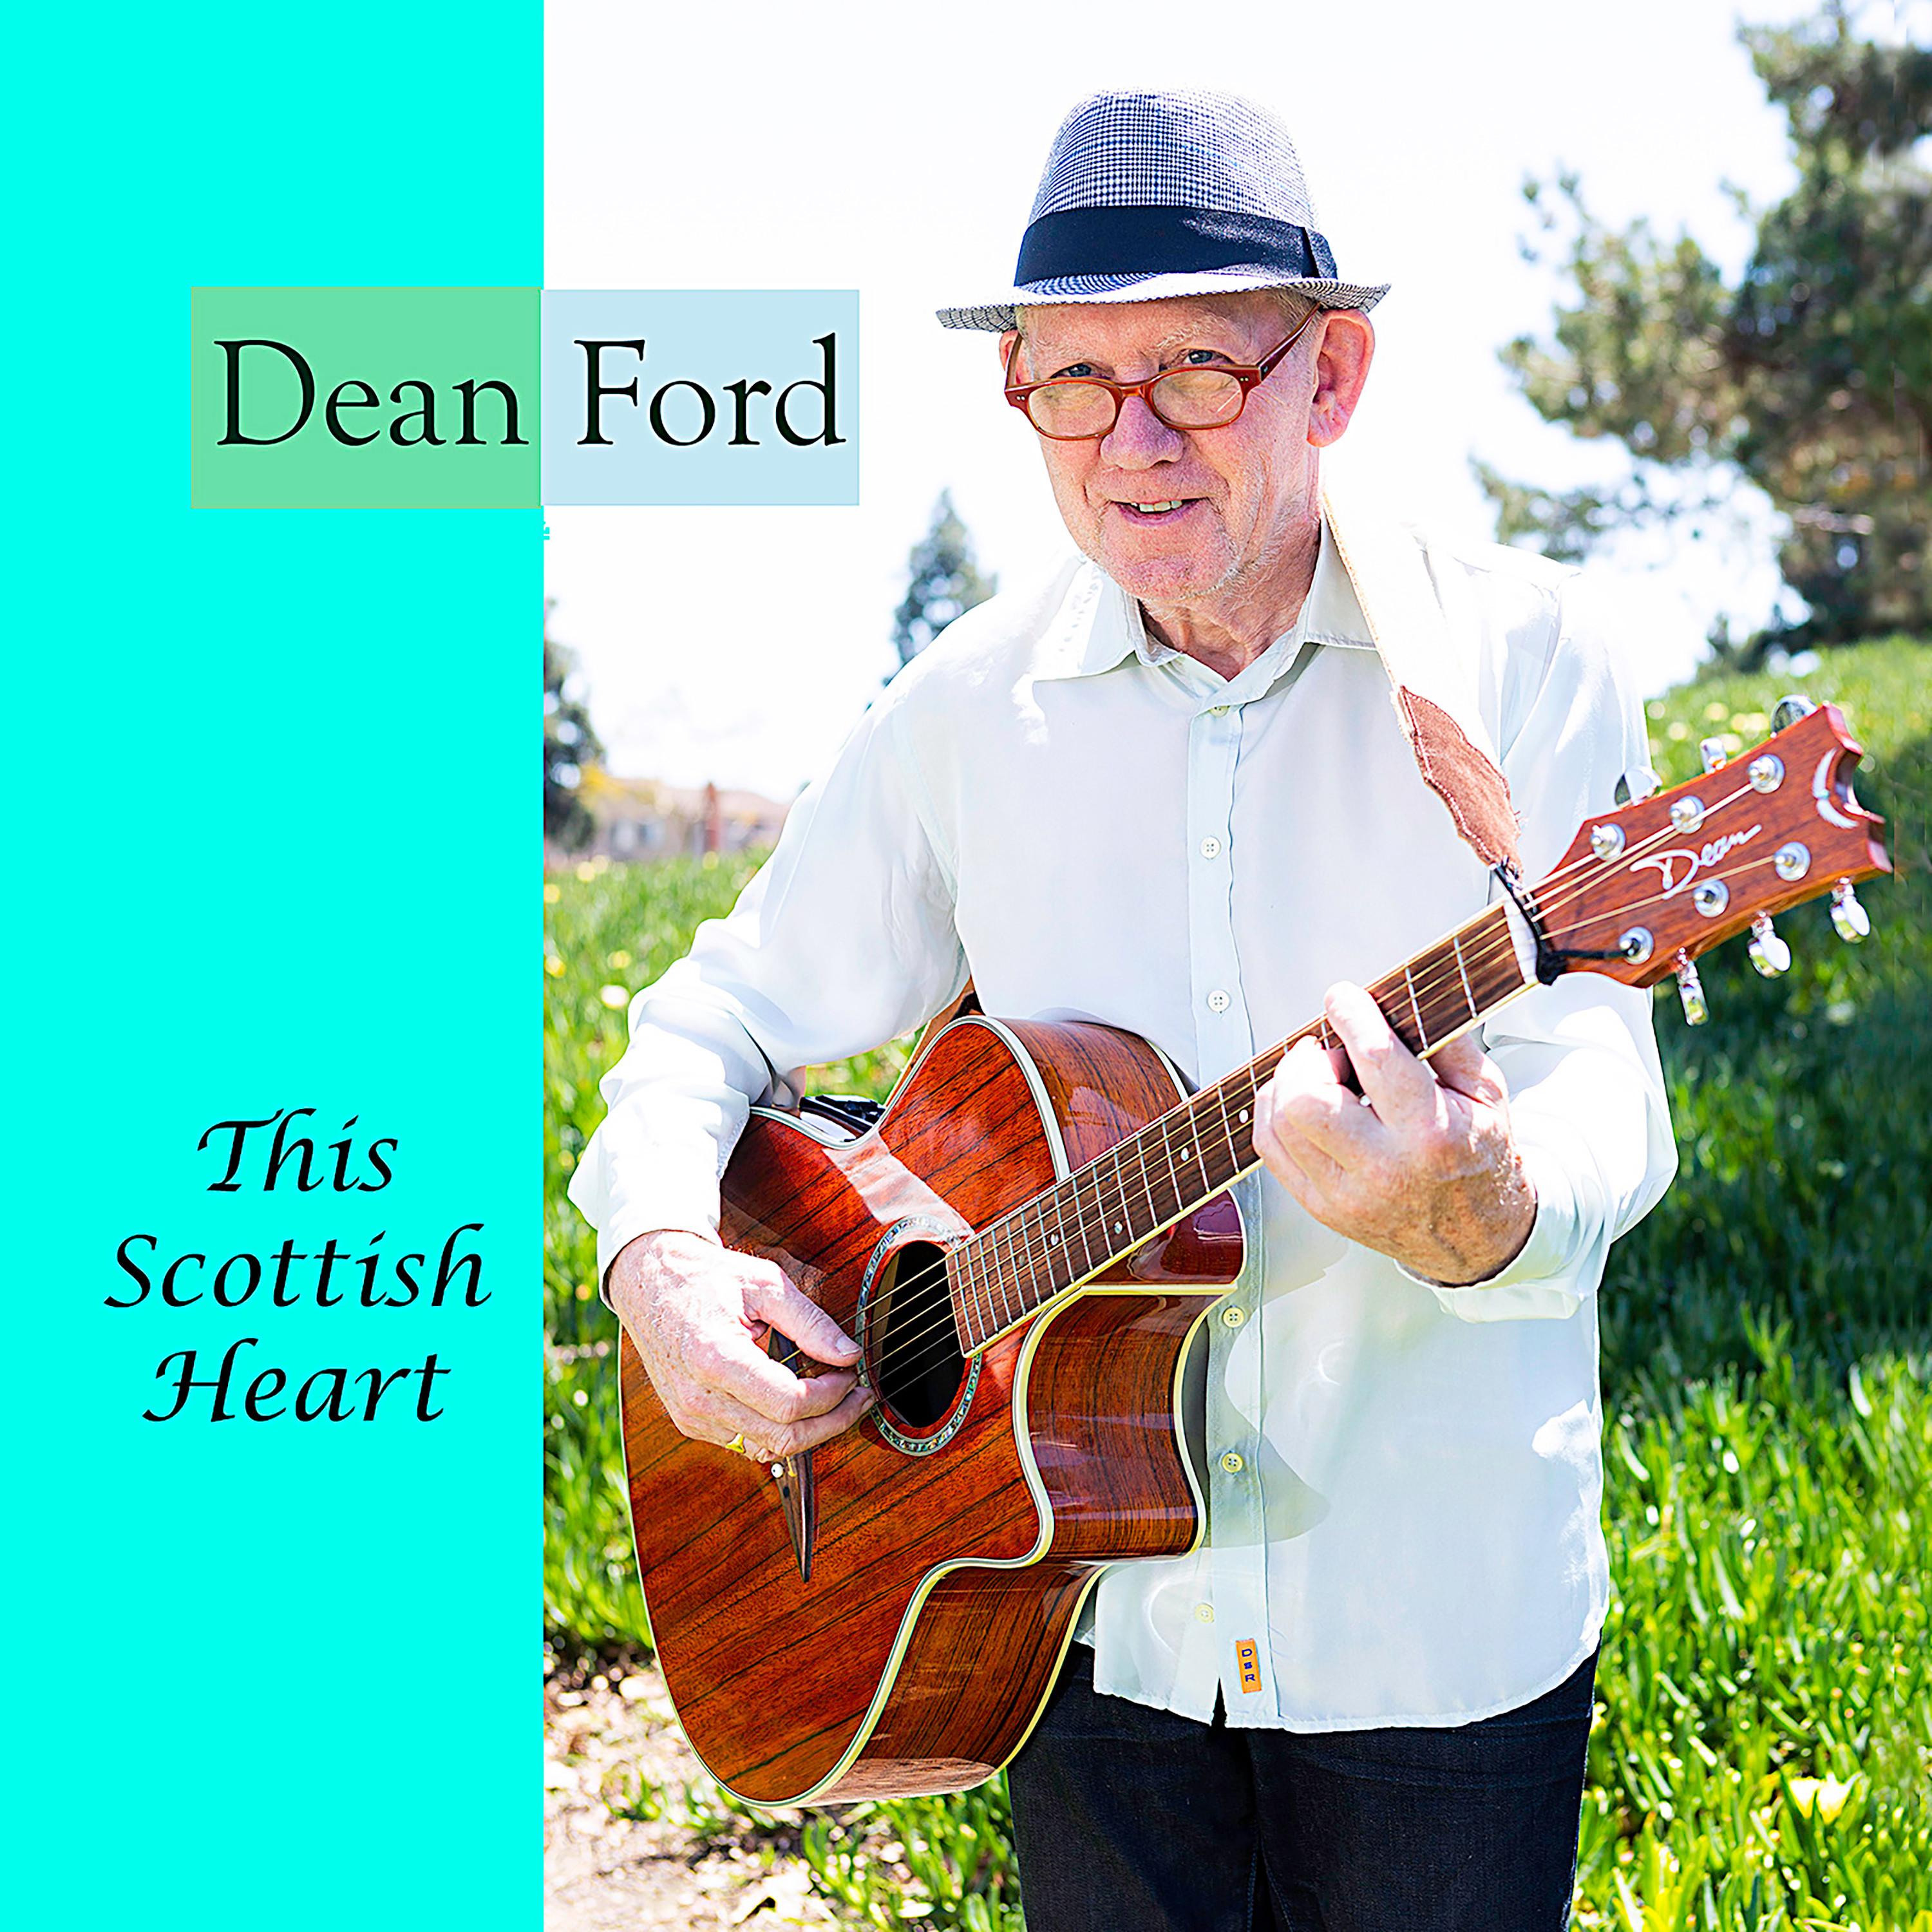 This Scottish Heart by Dean Ford